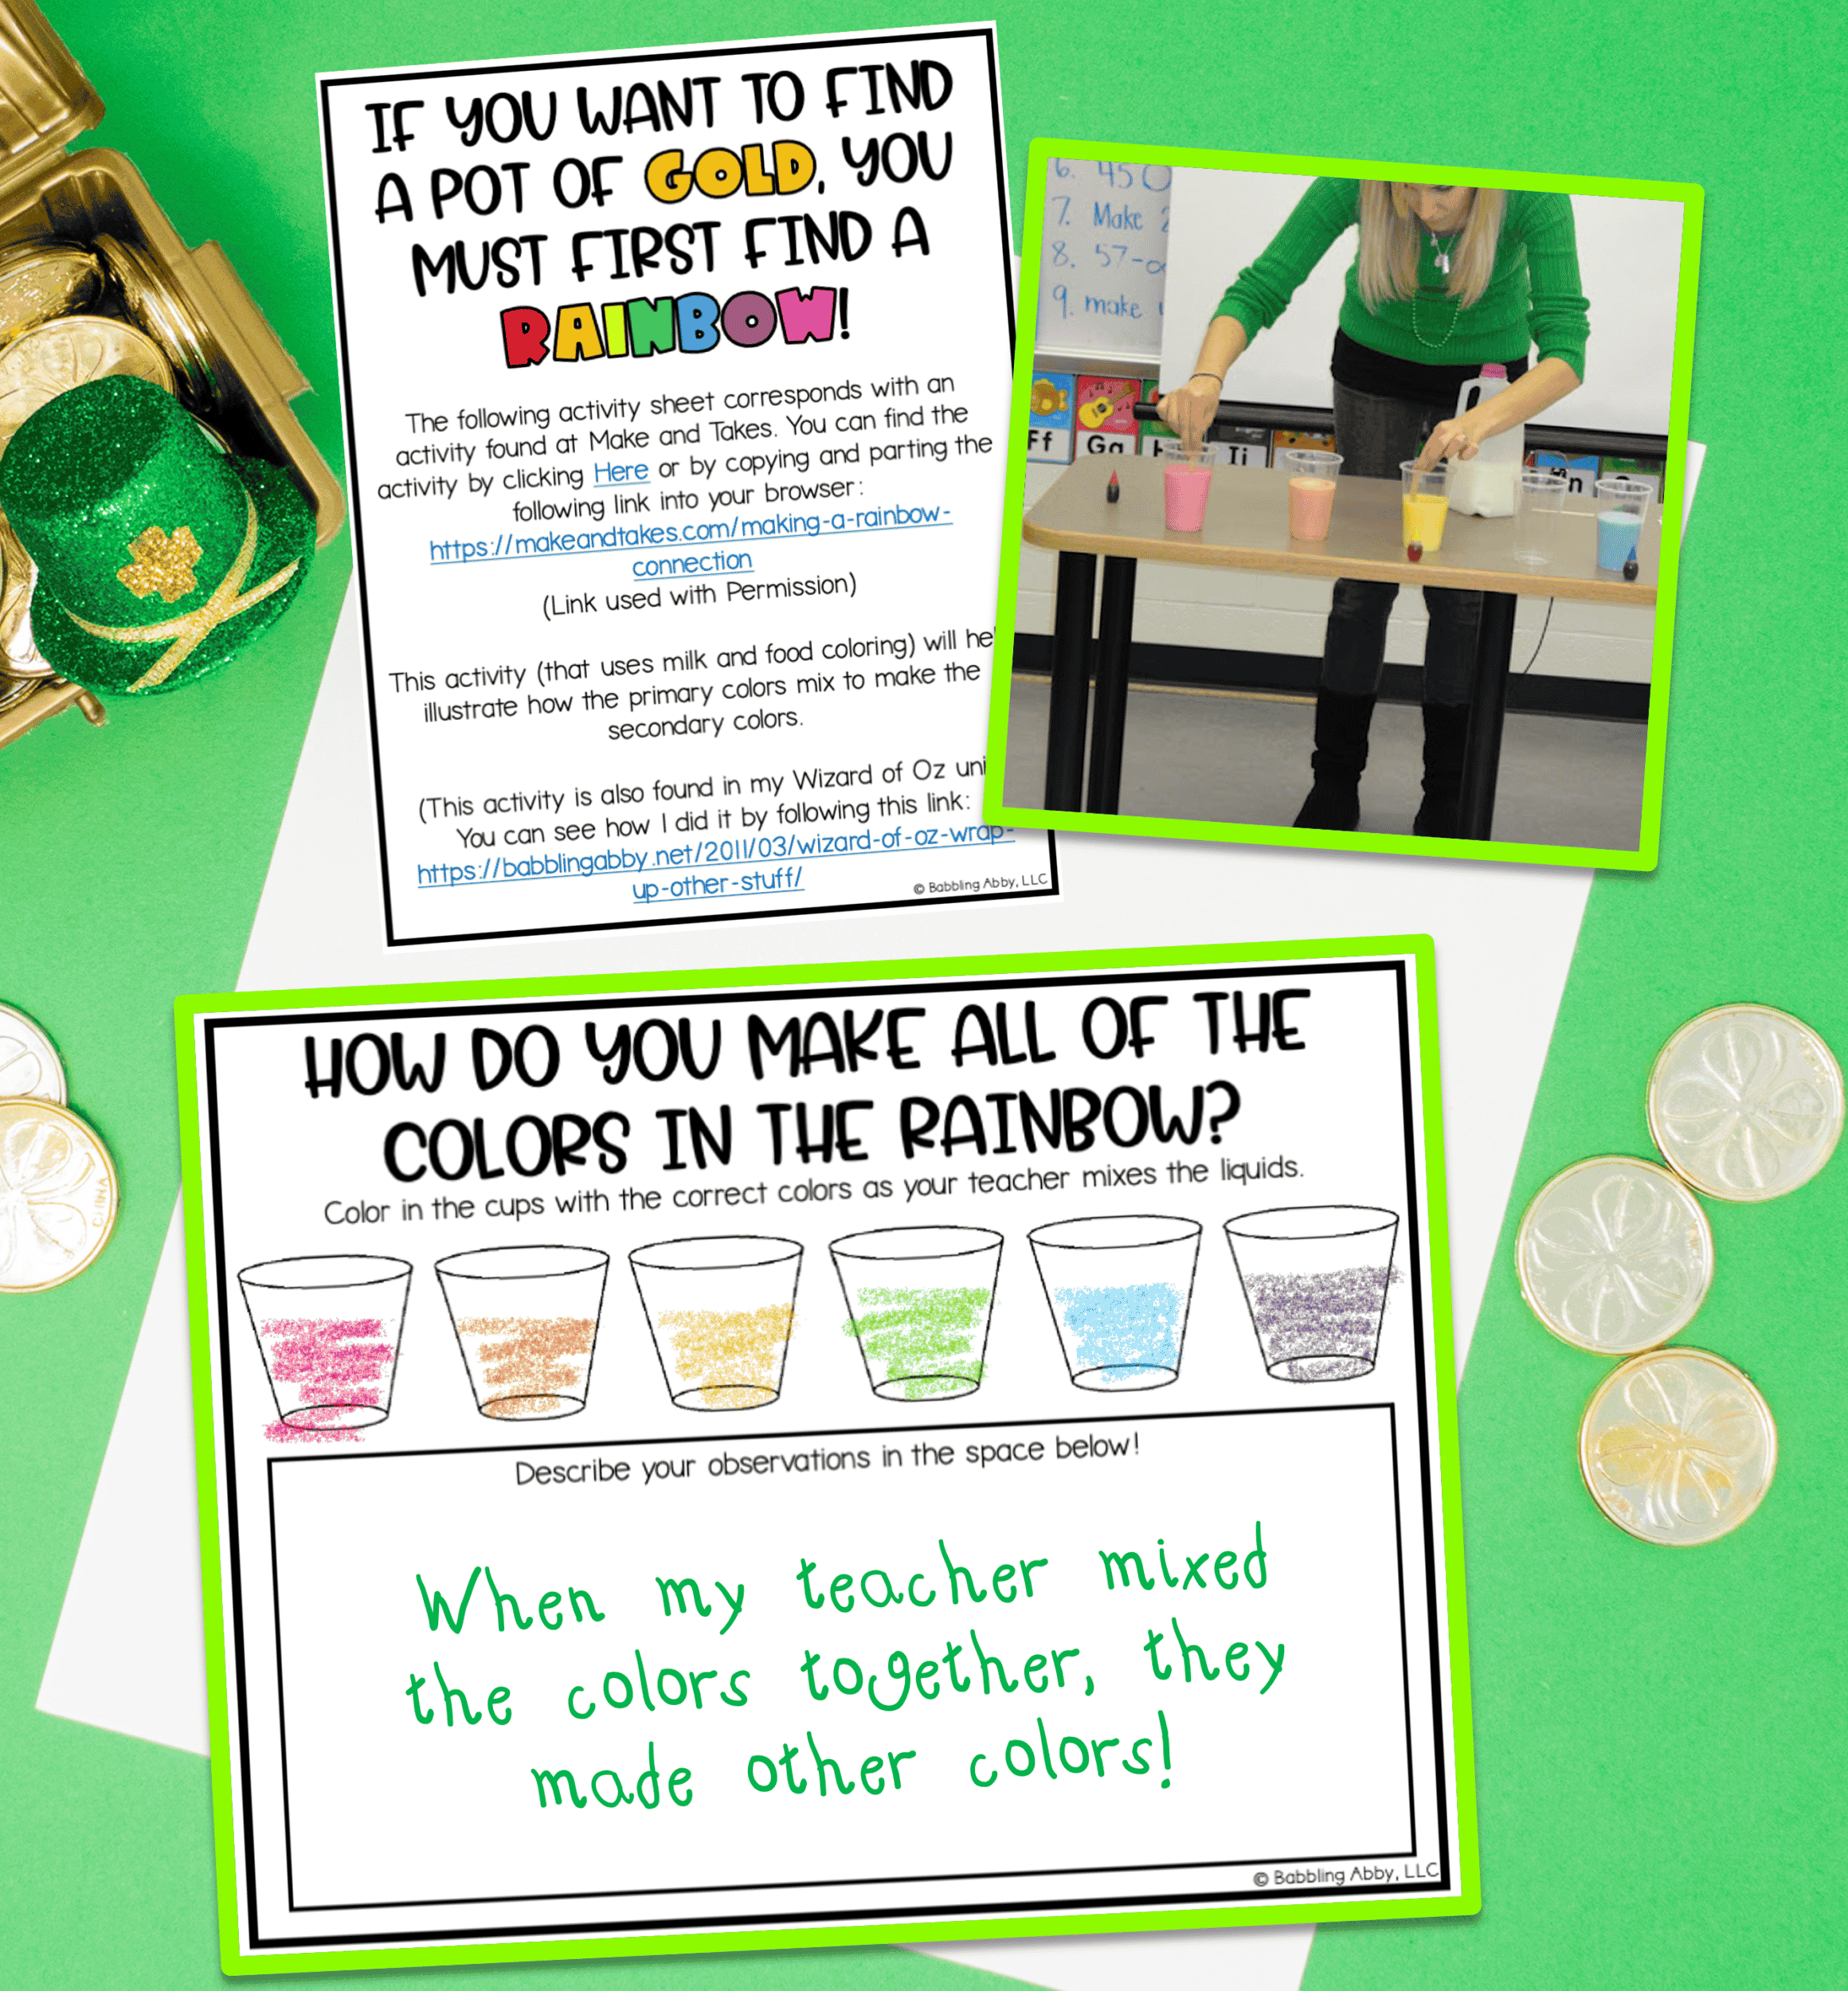 If you're looking for St. Patrick's Day Activities that your students will love, you've come to the right place! Here are several ideas that will make your students feel lucky to be in your classroom! babblingabby.net